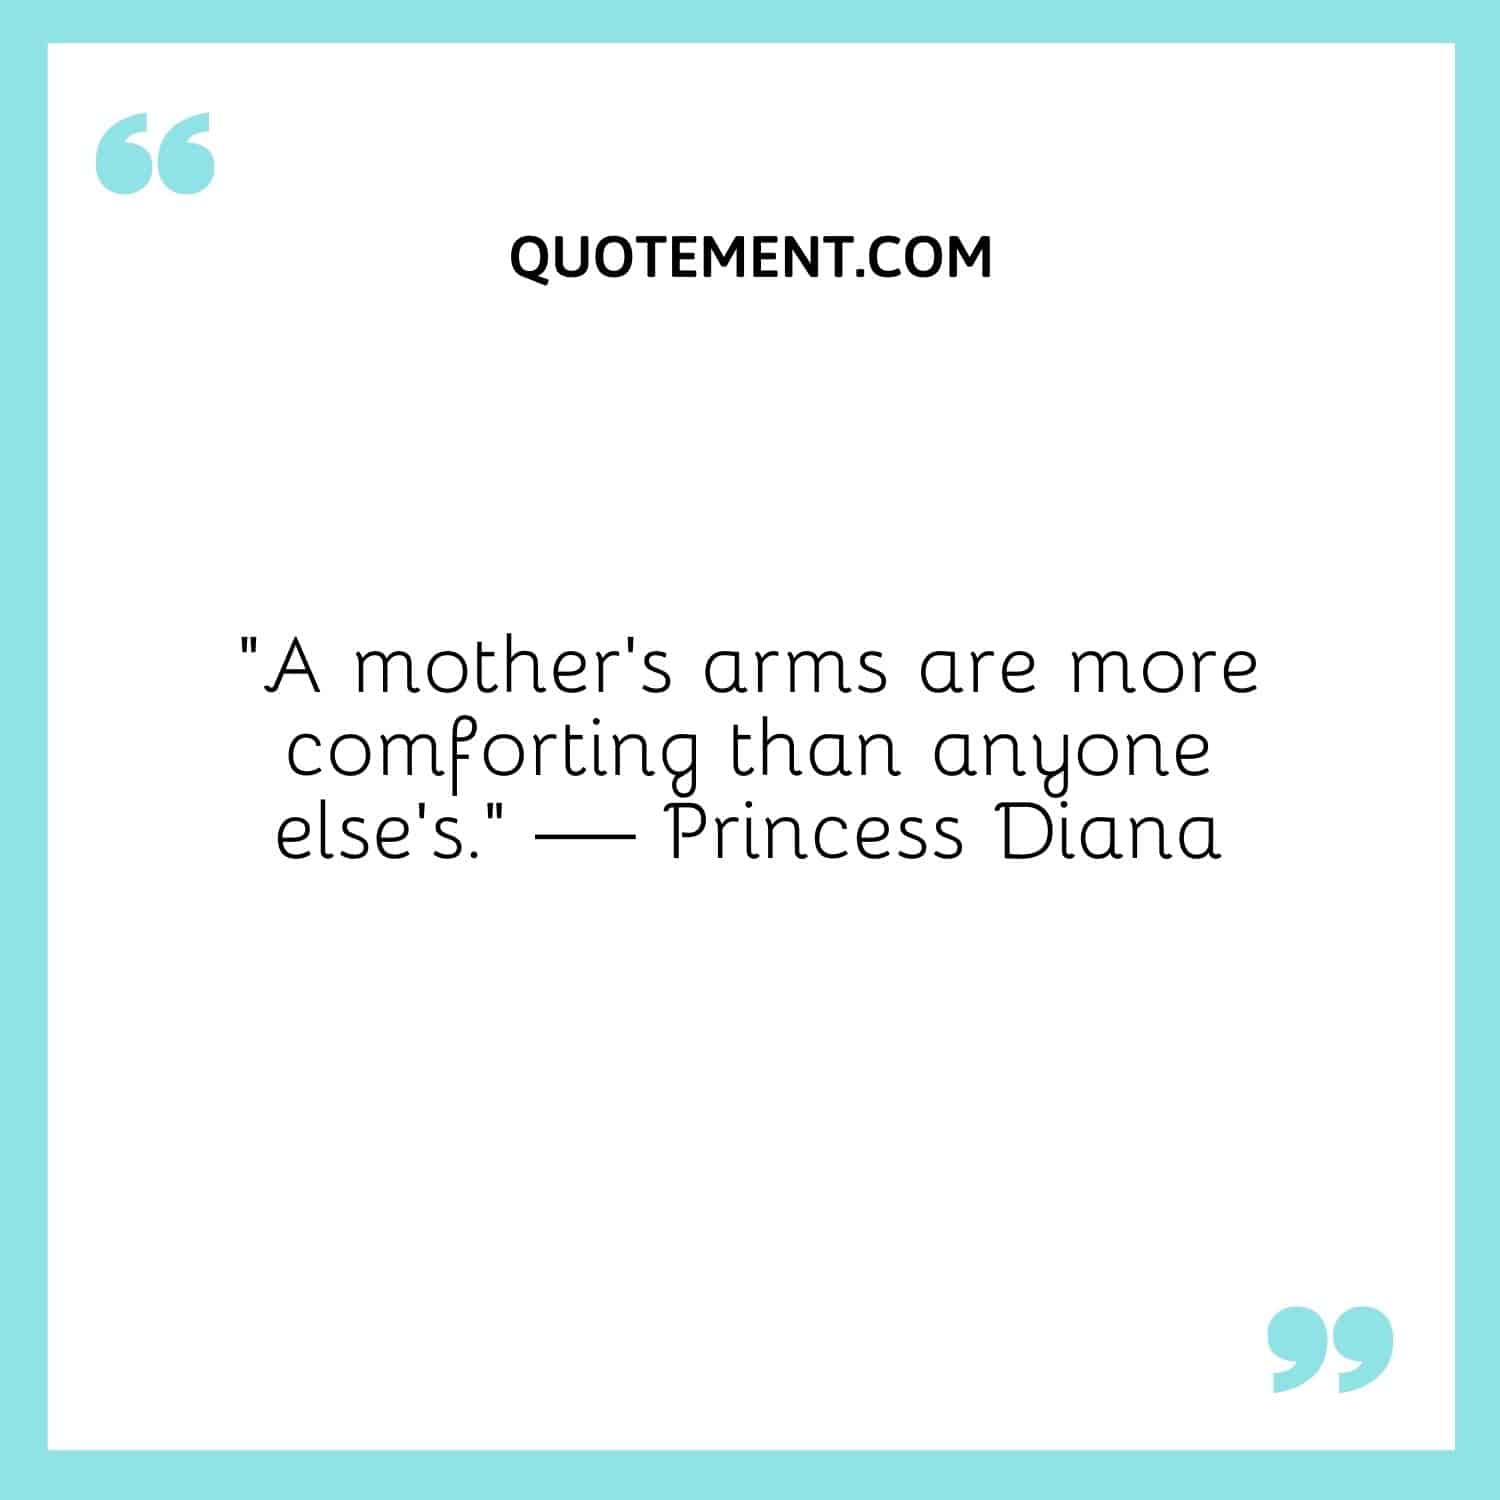 A mother’s arms are more comforting than anyone else’s